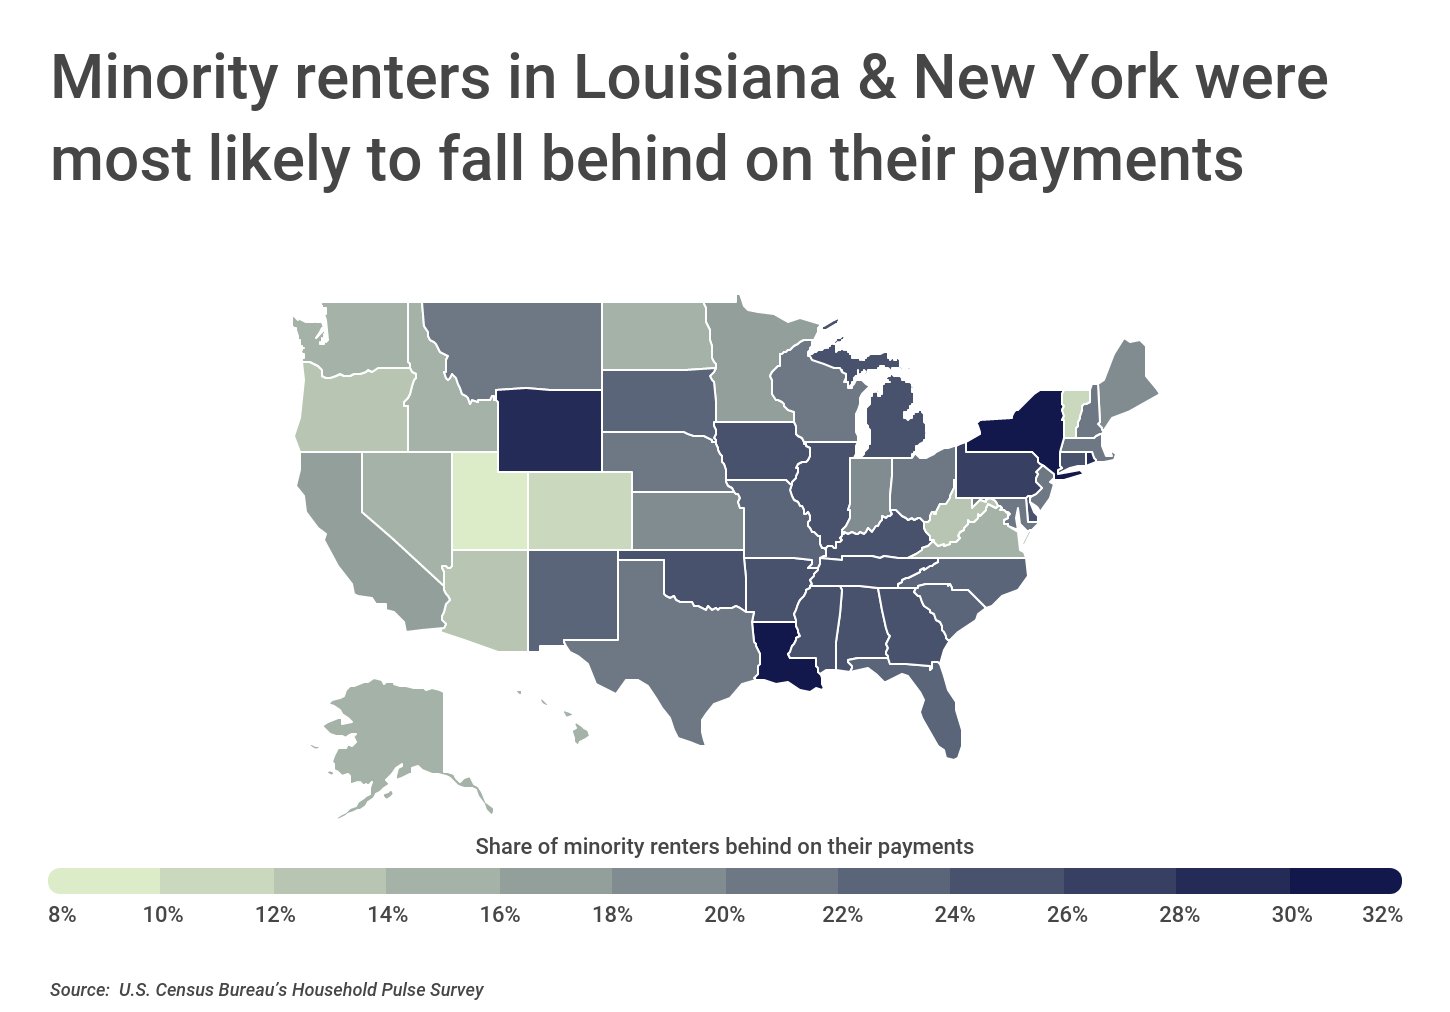 Chart3_Minority renters in LA & NY were most likely to fall behind